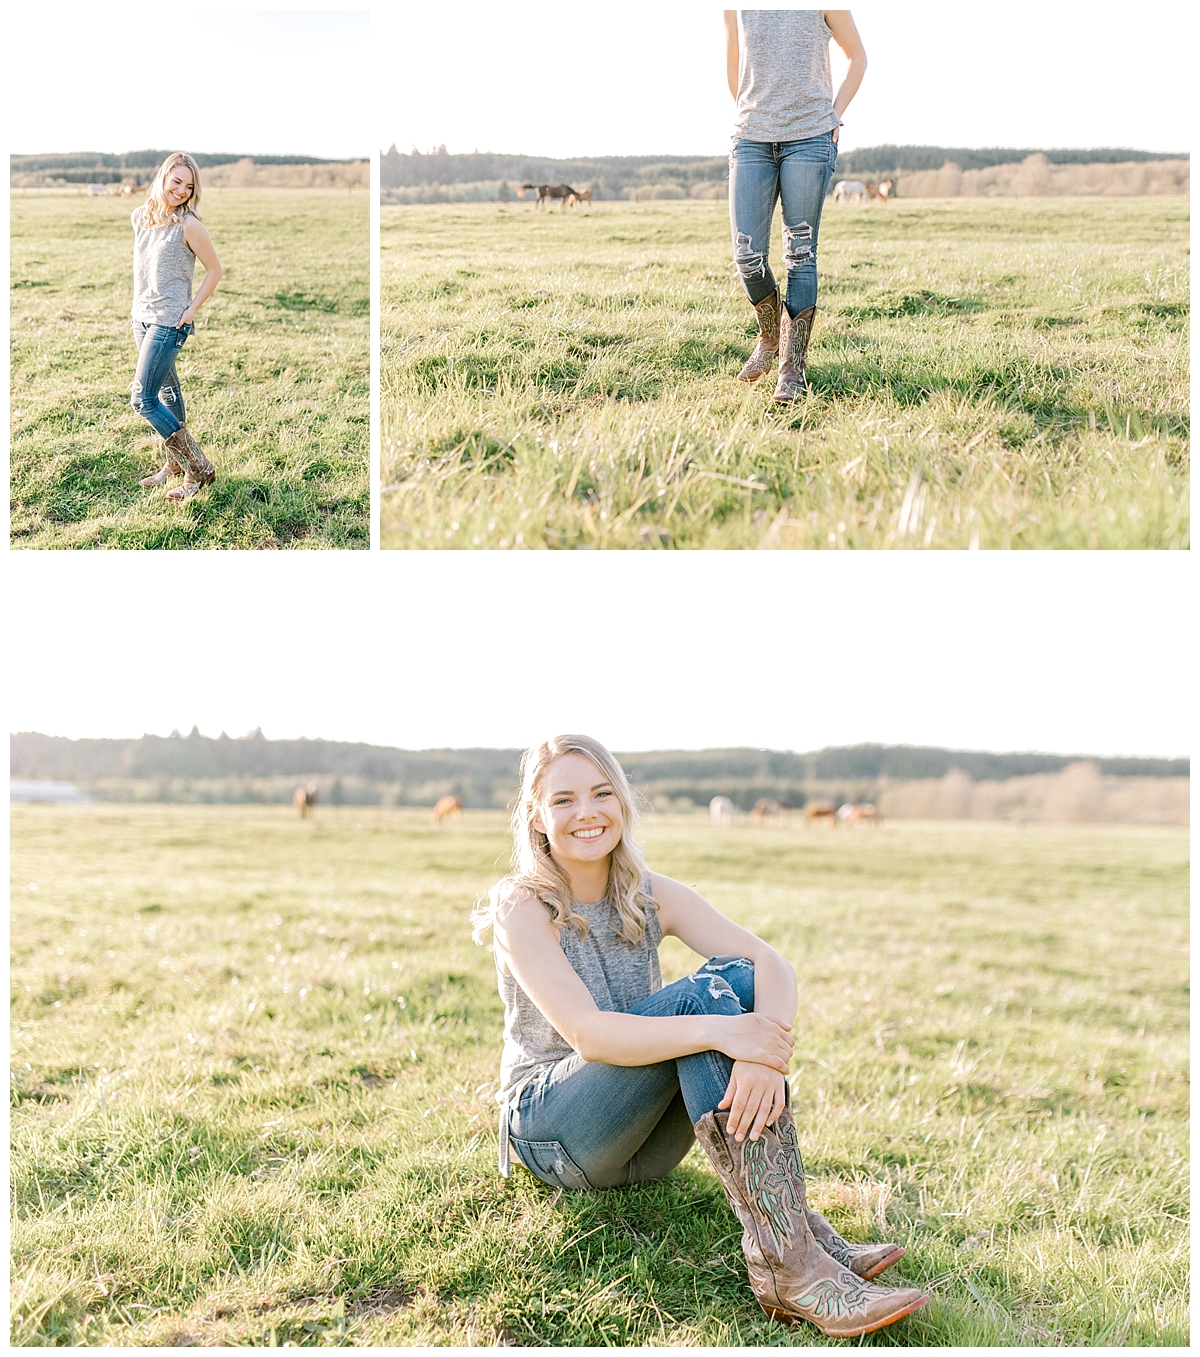 Sunset Senior Session with Horse | Senior Session Inspiration Session | Horse Photo Session | Pacific Northwest Light and Airy Wedding and Portrait Photographer | Emma Rose Company | Kindred Presets Senior Posing.jpg